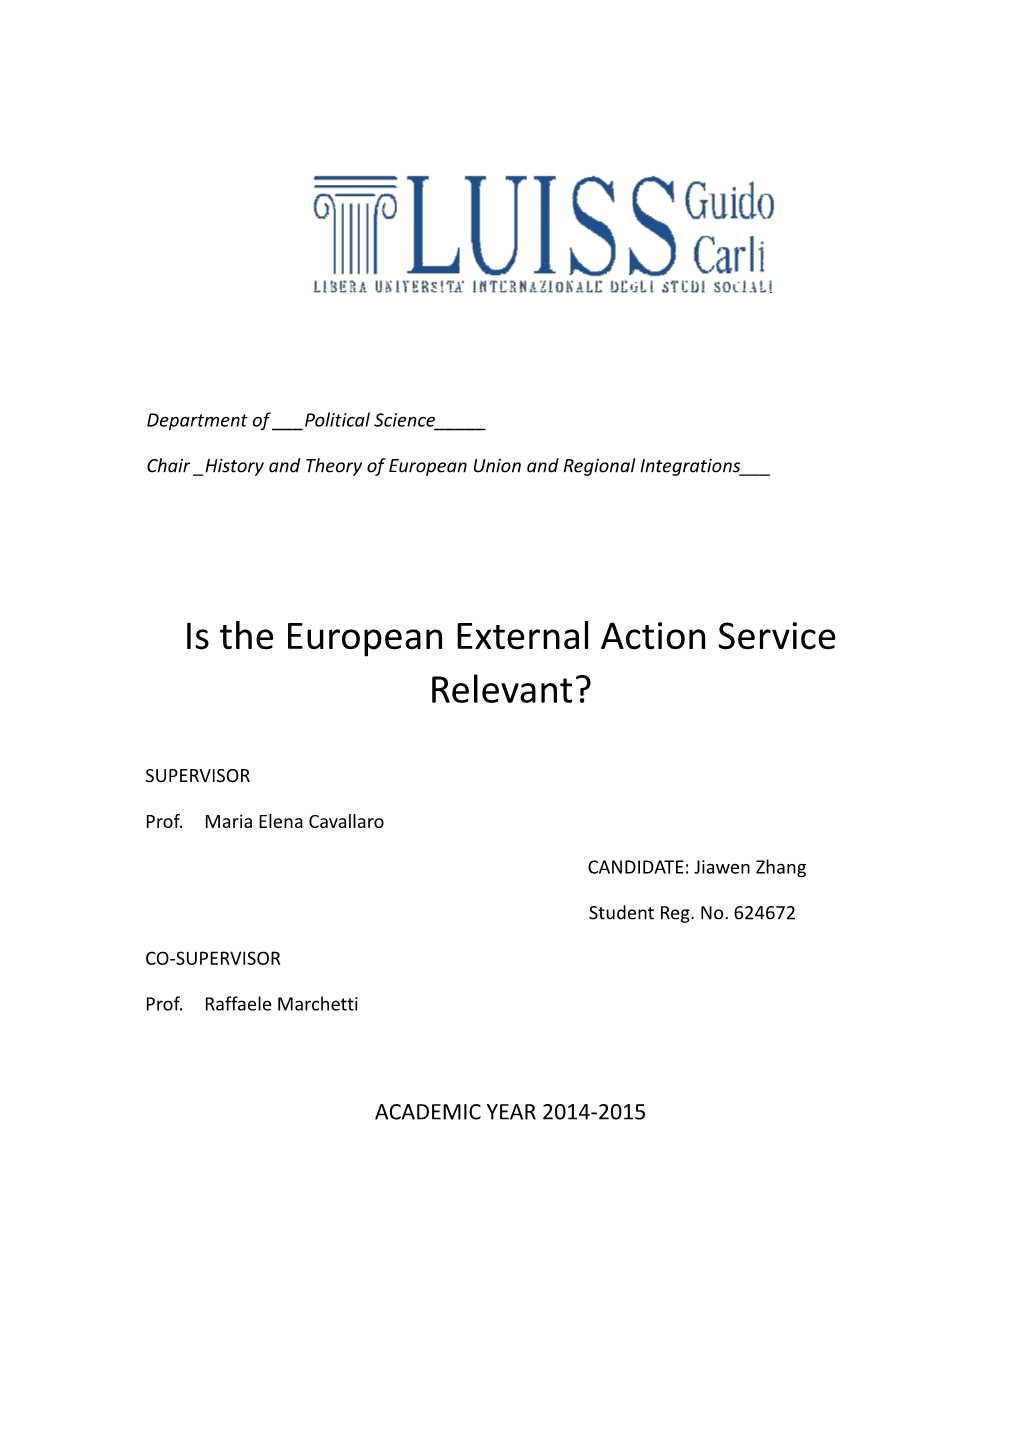 Is the European External Action Service Relevant?